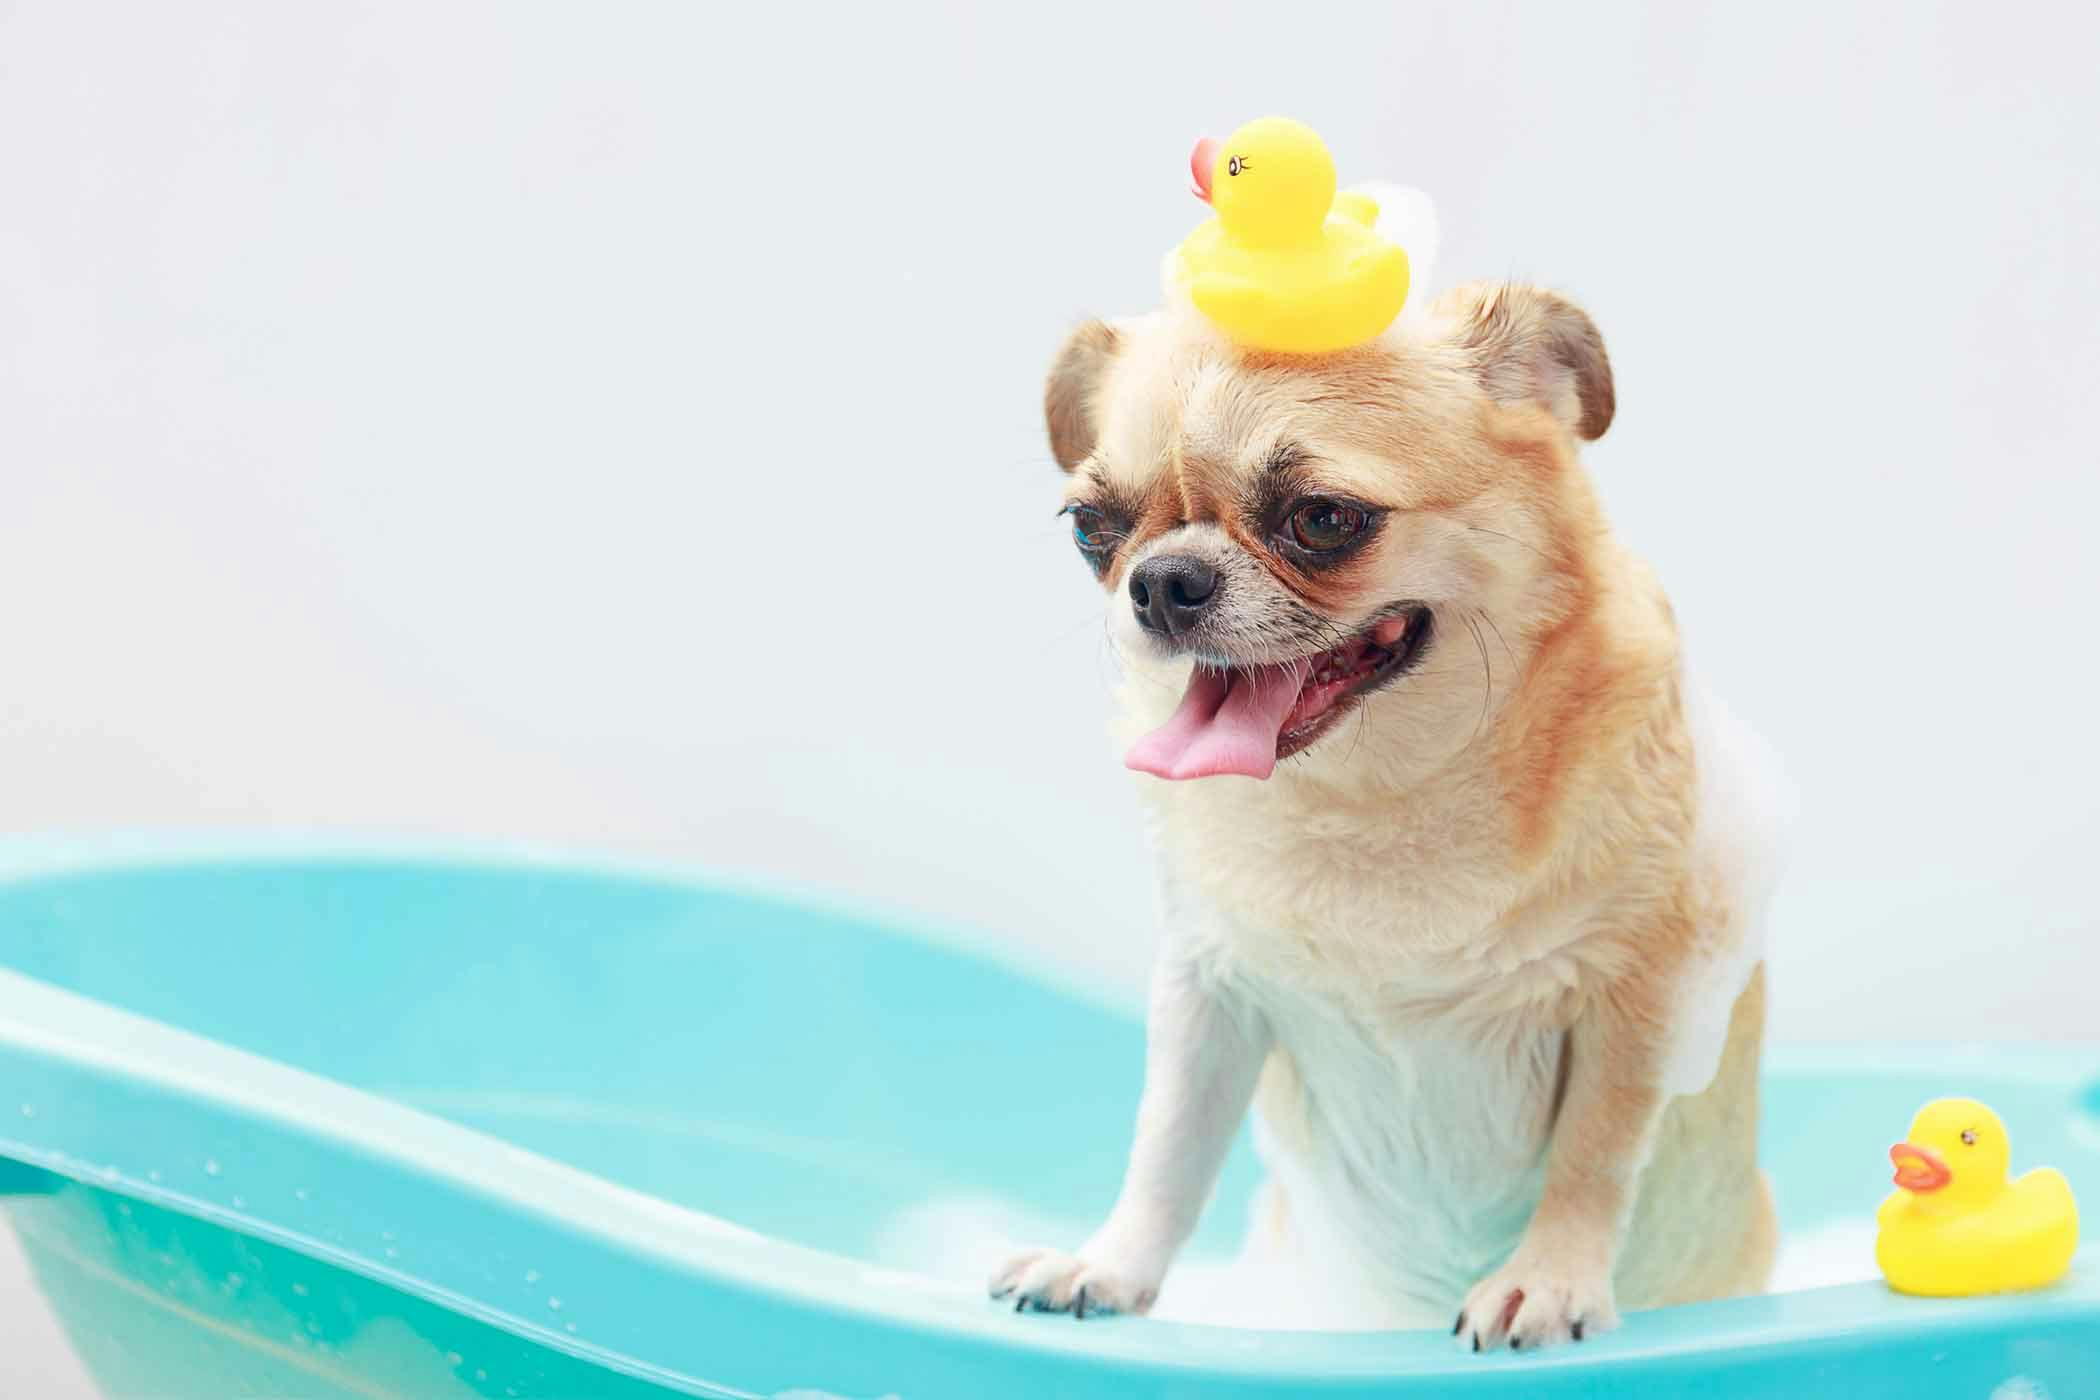 Train Your Dog To In The Bathtub, How To Keep Dog From Slipping In Bathtub